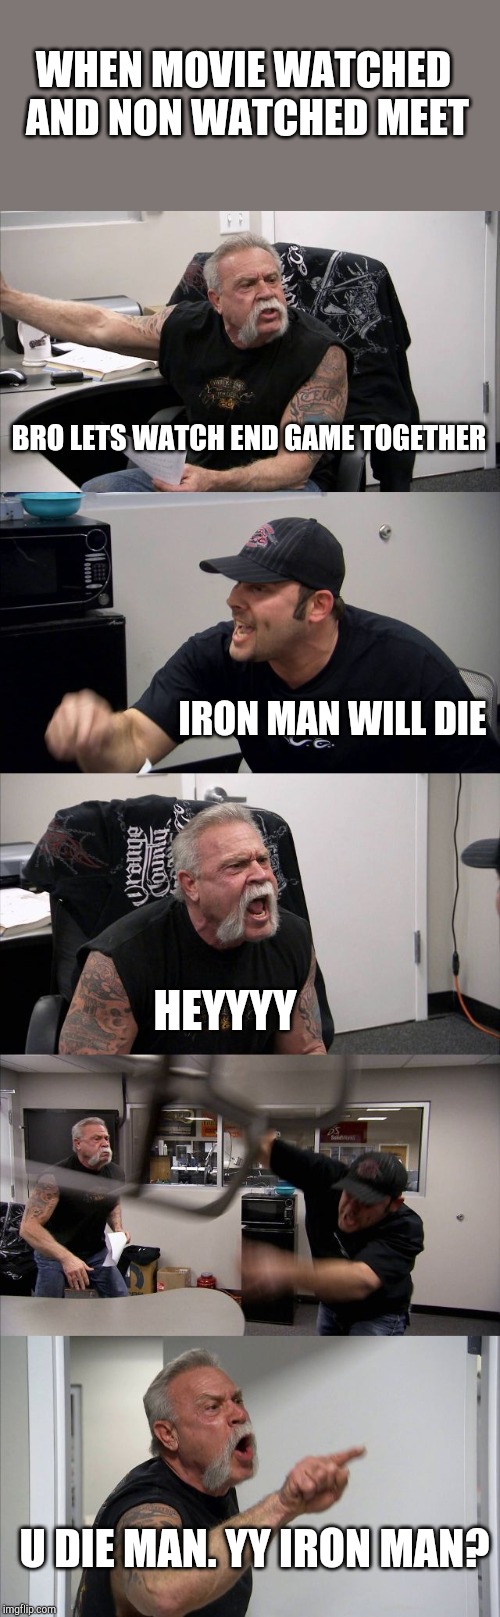 American Chopper Argument Meme | WHEN MOVIE WATCHED AND NON WATCHED MEET; BRO LETS WATCH END GAME TOGETHER; IRON MAN WILL DIE; HEYYYY; U DIE MAN. YY IRON MAN? | image tagged in memes,american chopper argument | made w/ Imgflip meme maker